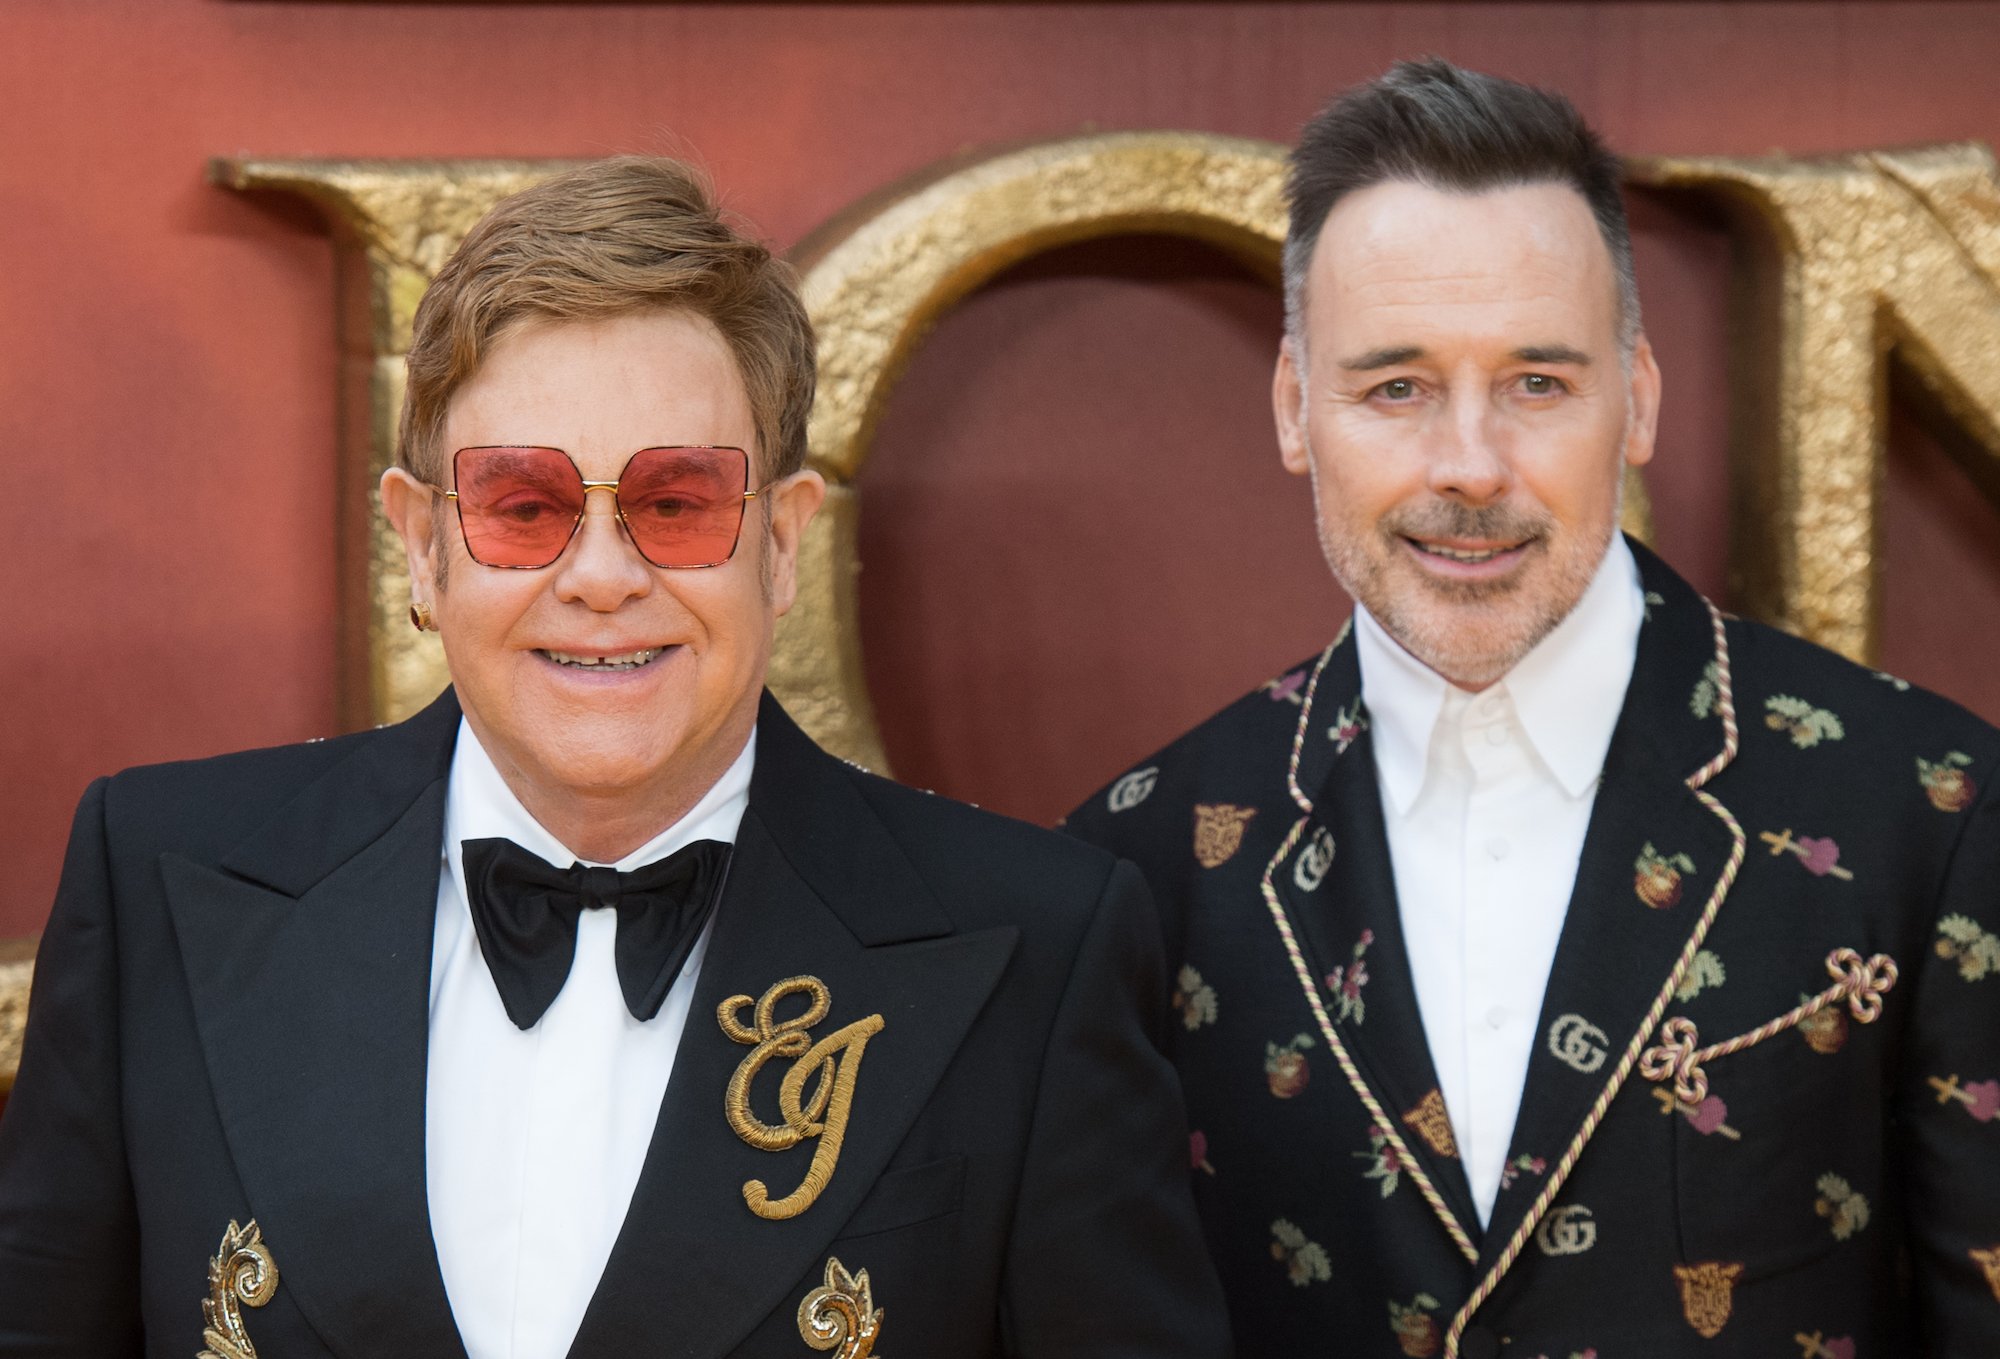 Elton John and husband David Furnish attend The Lion King premiere in London, England